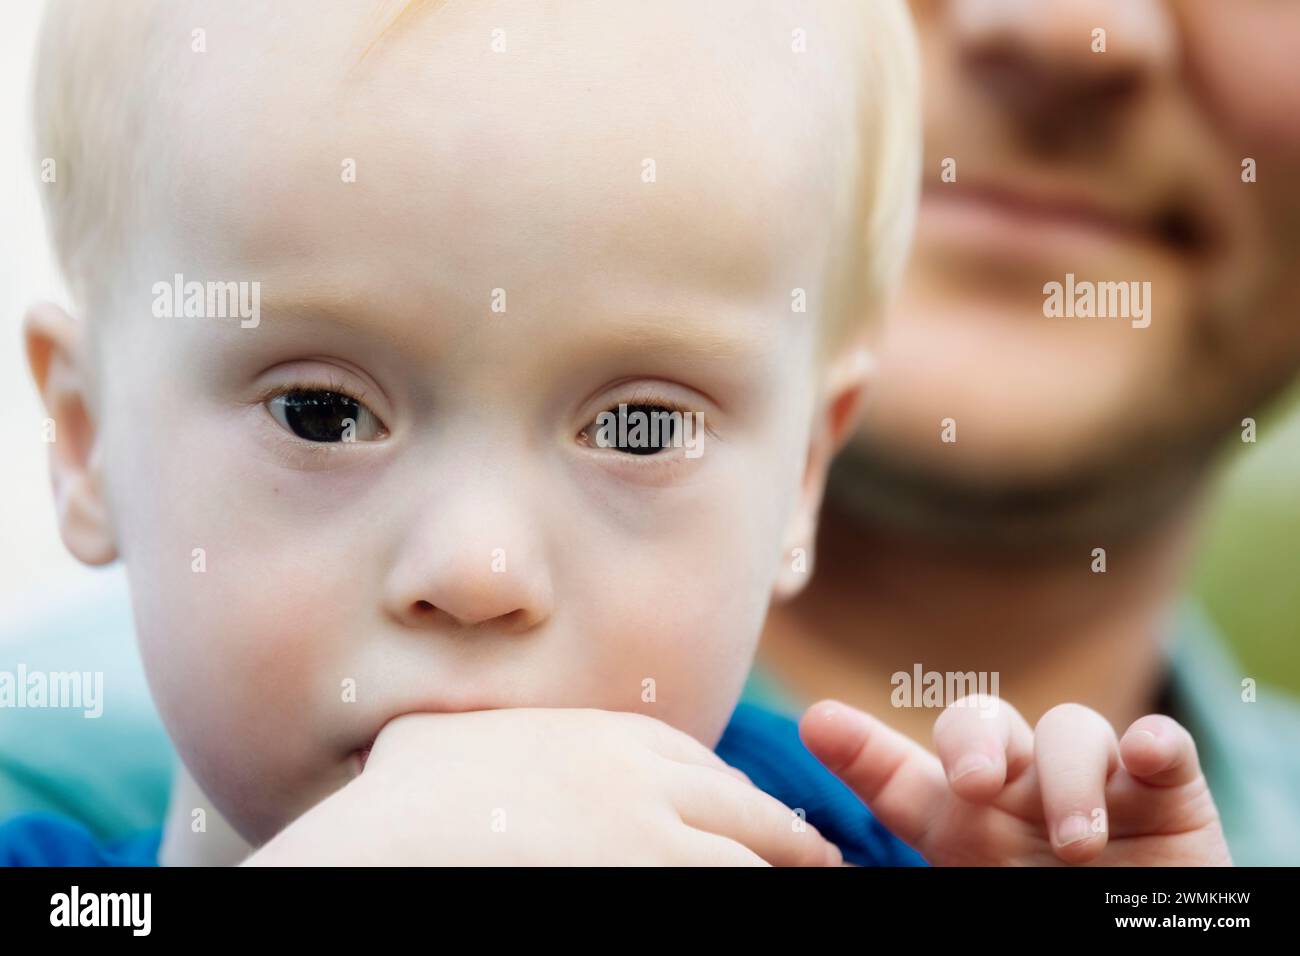 Close-up portrait of a young boy who has Down Syndrome, with his father in the background; Leduc, Alberta, Canada Stock Photo